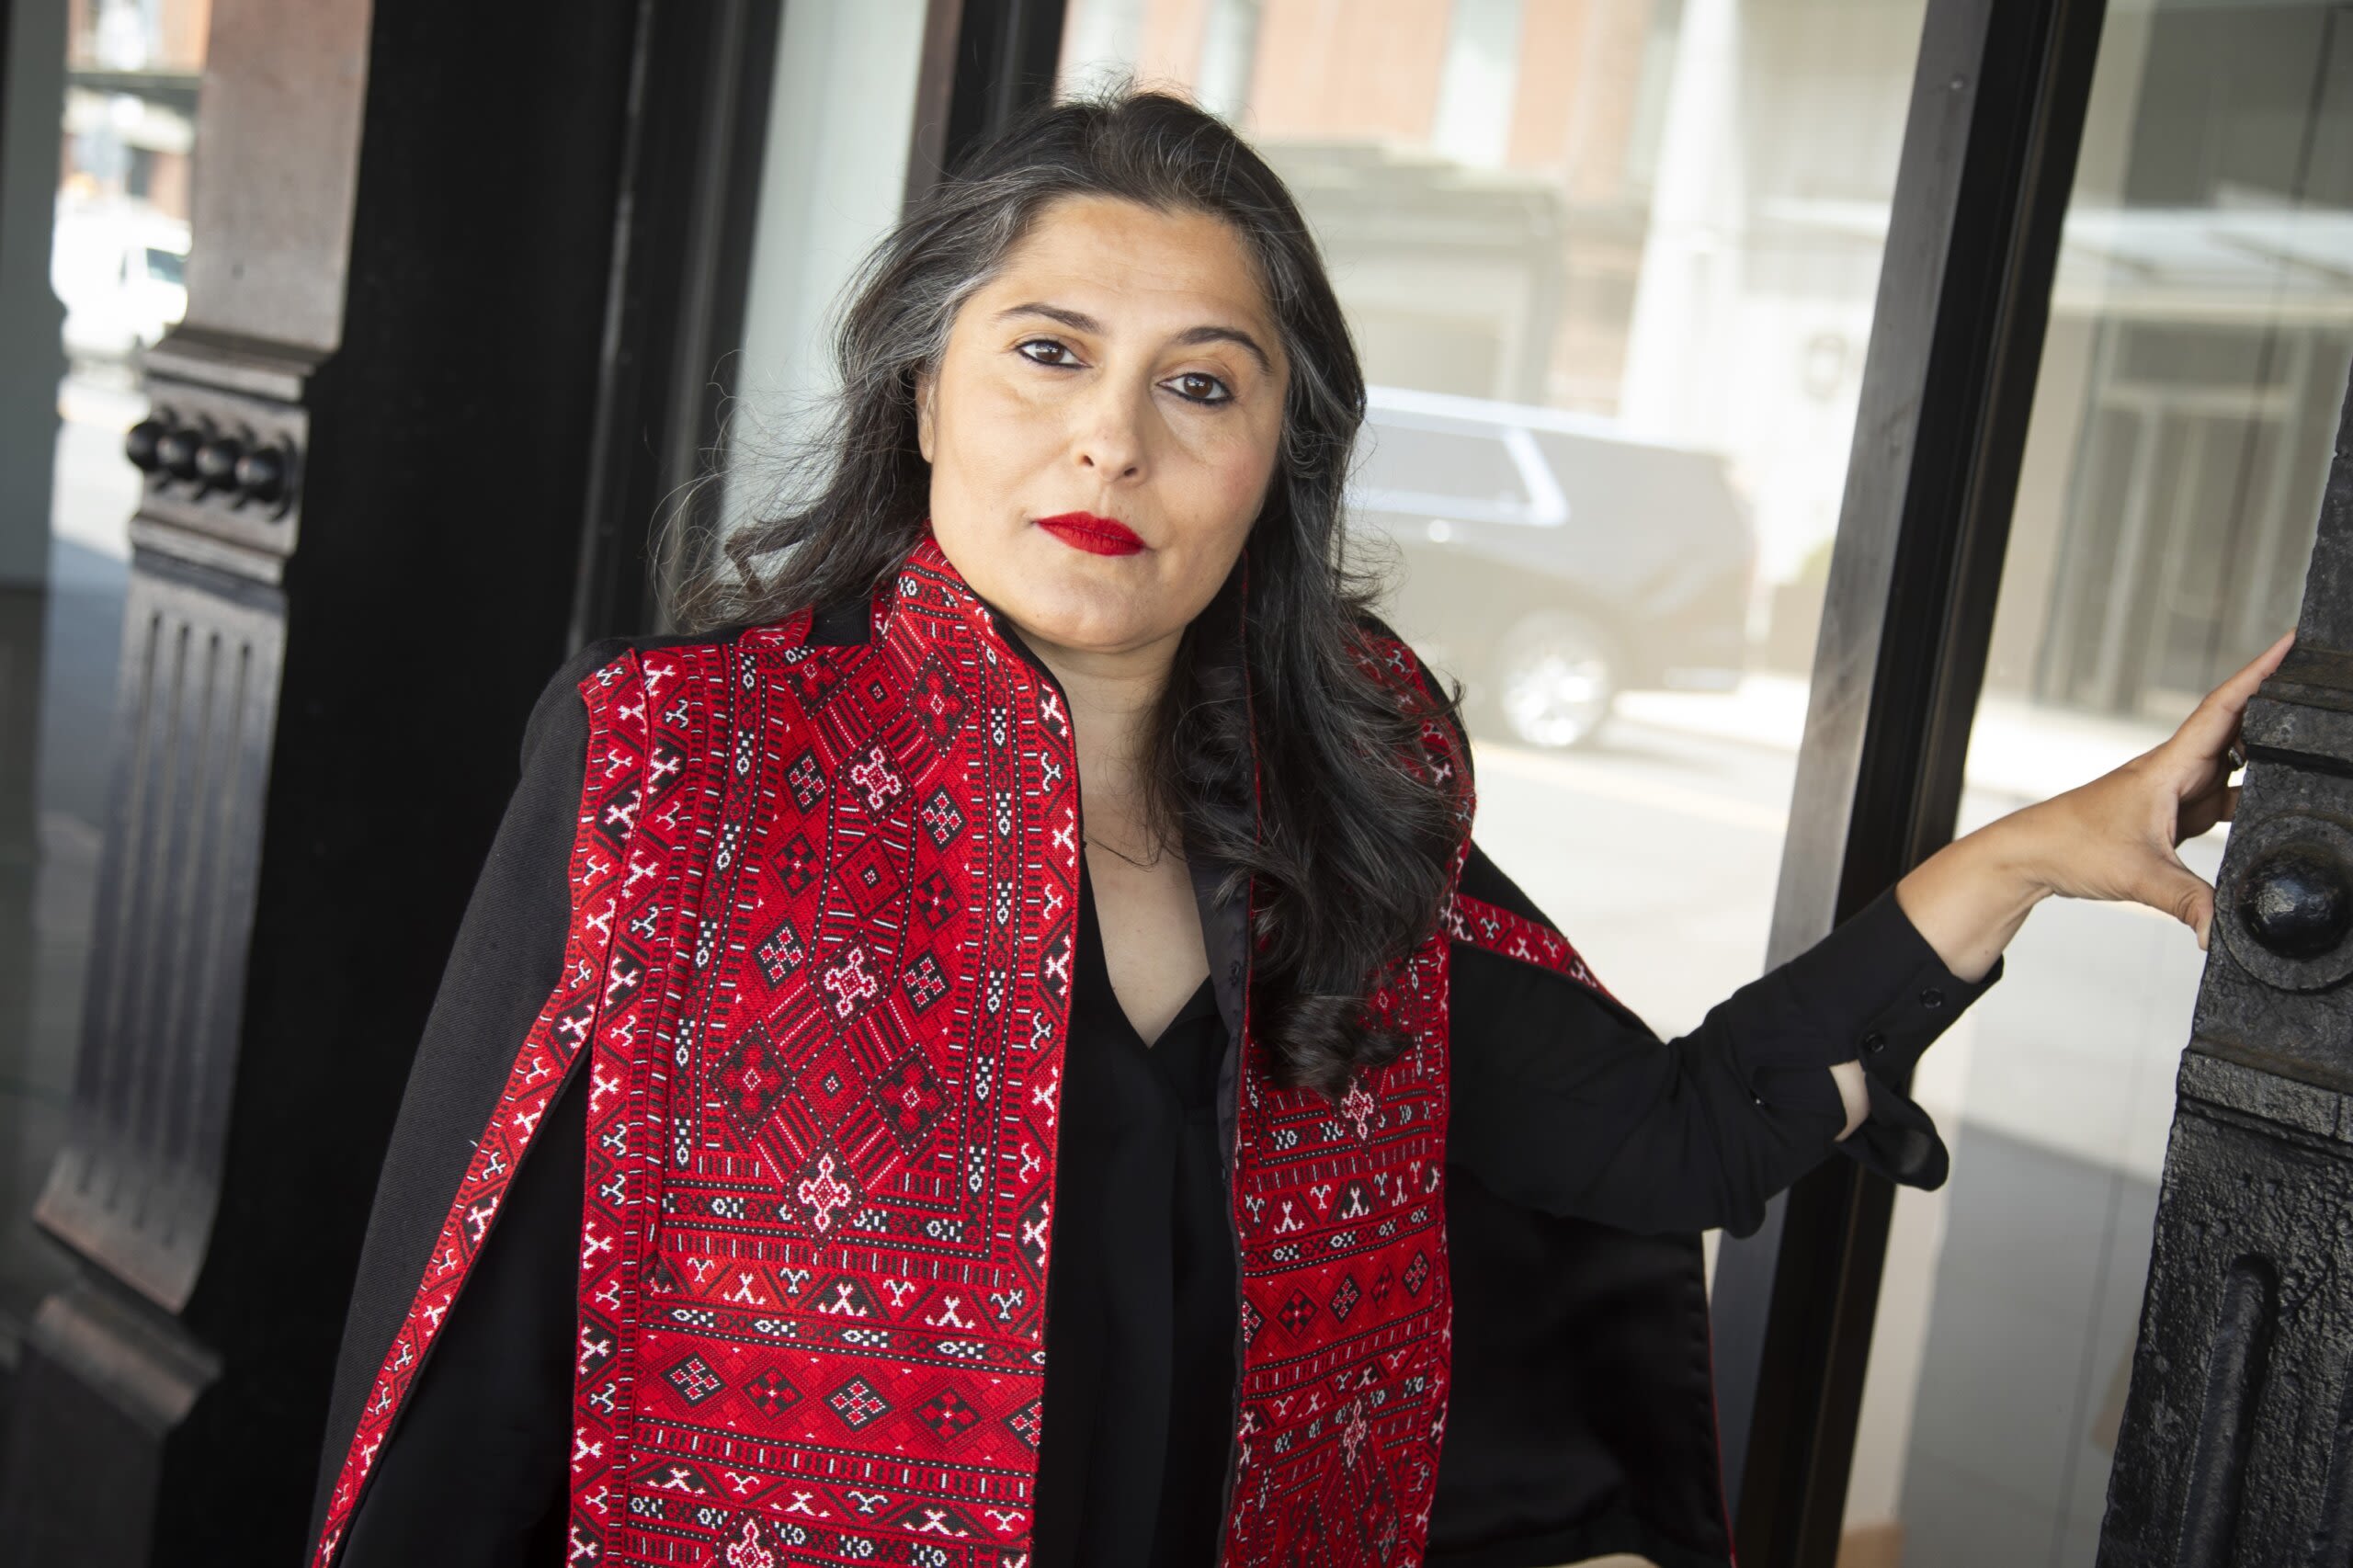 From DVF to Star Wars, filmmaker Sharmeen Obaid-Chinoy charts her own path in Hollywood - WTOP News